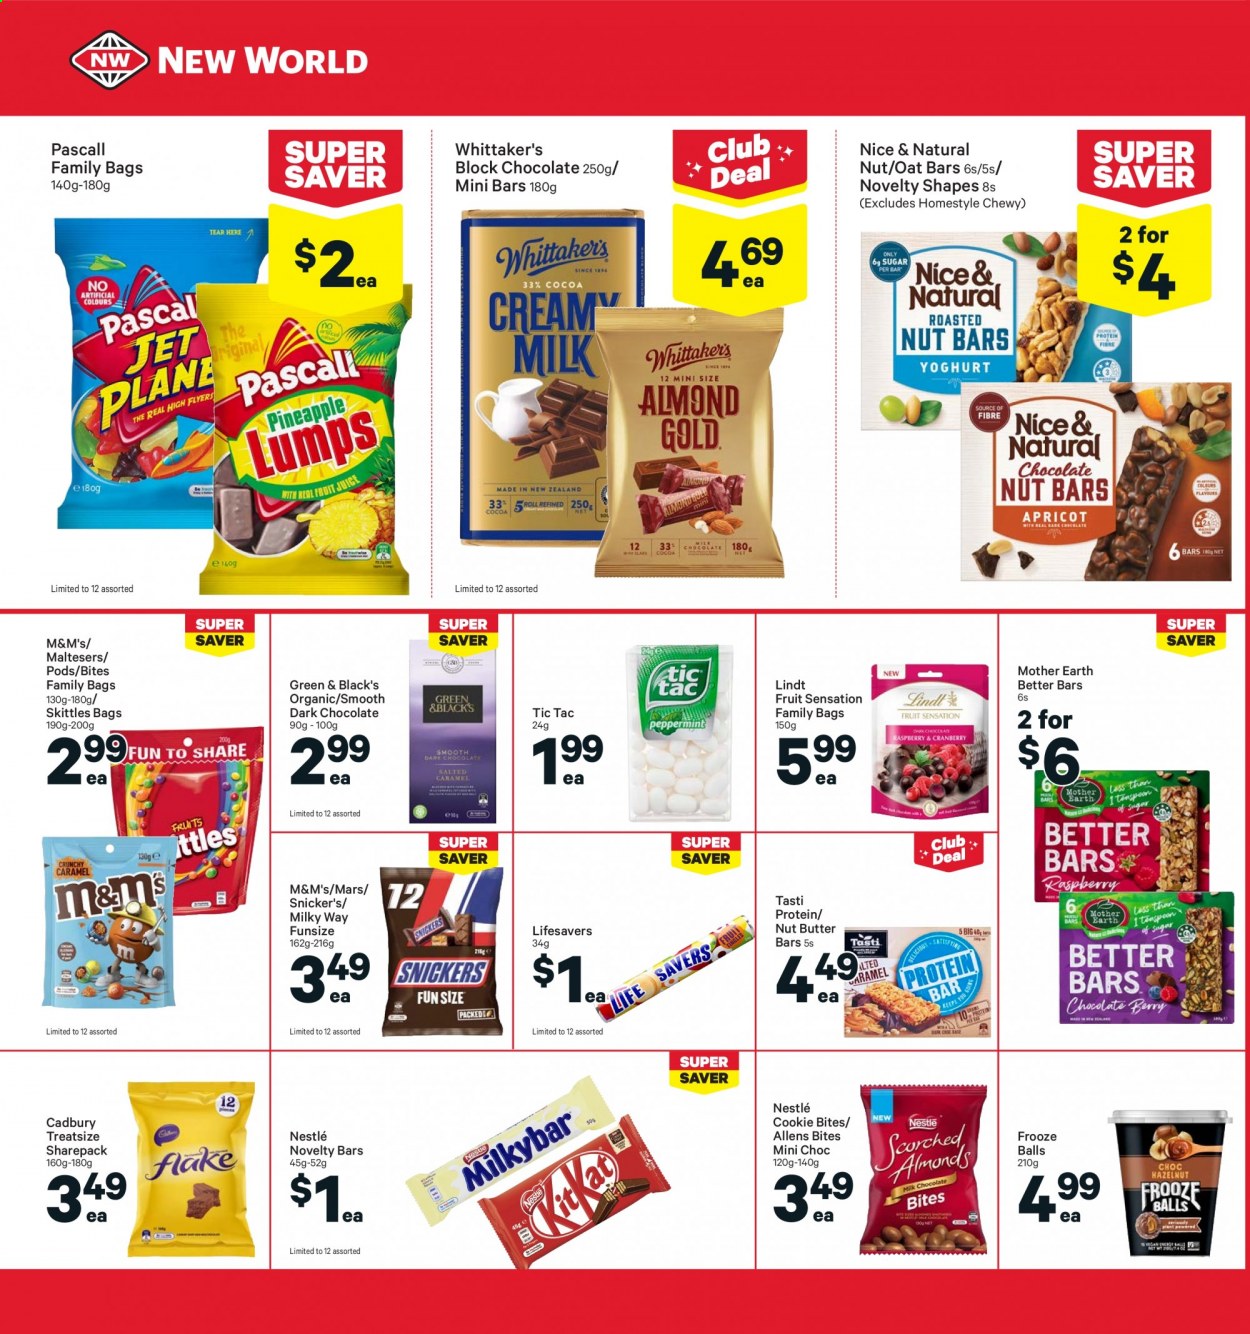 thumbnail - New World mailer - 19.07.2021 - 25.07.2021 - Sales products - Nestlé, chocolate, Lindt, Milky Way, Mars, M&M's, dark chocolate, Maltesers, Cadbury, Mother Earth, Whittaker's, Skittles, Tic Tac. Page 18.